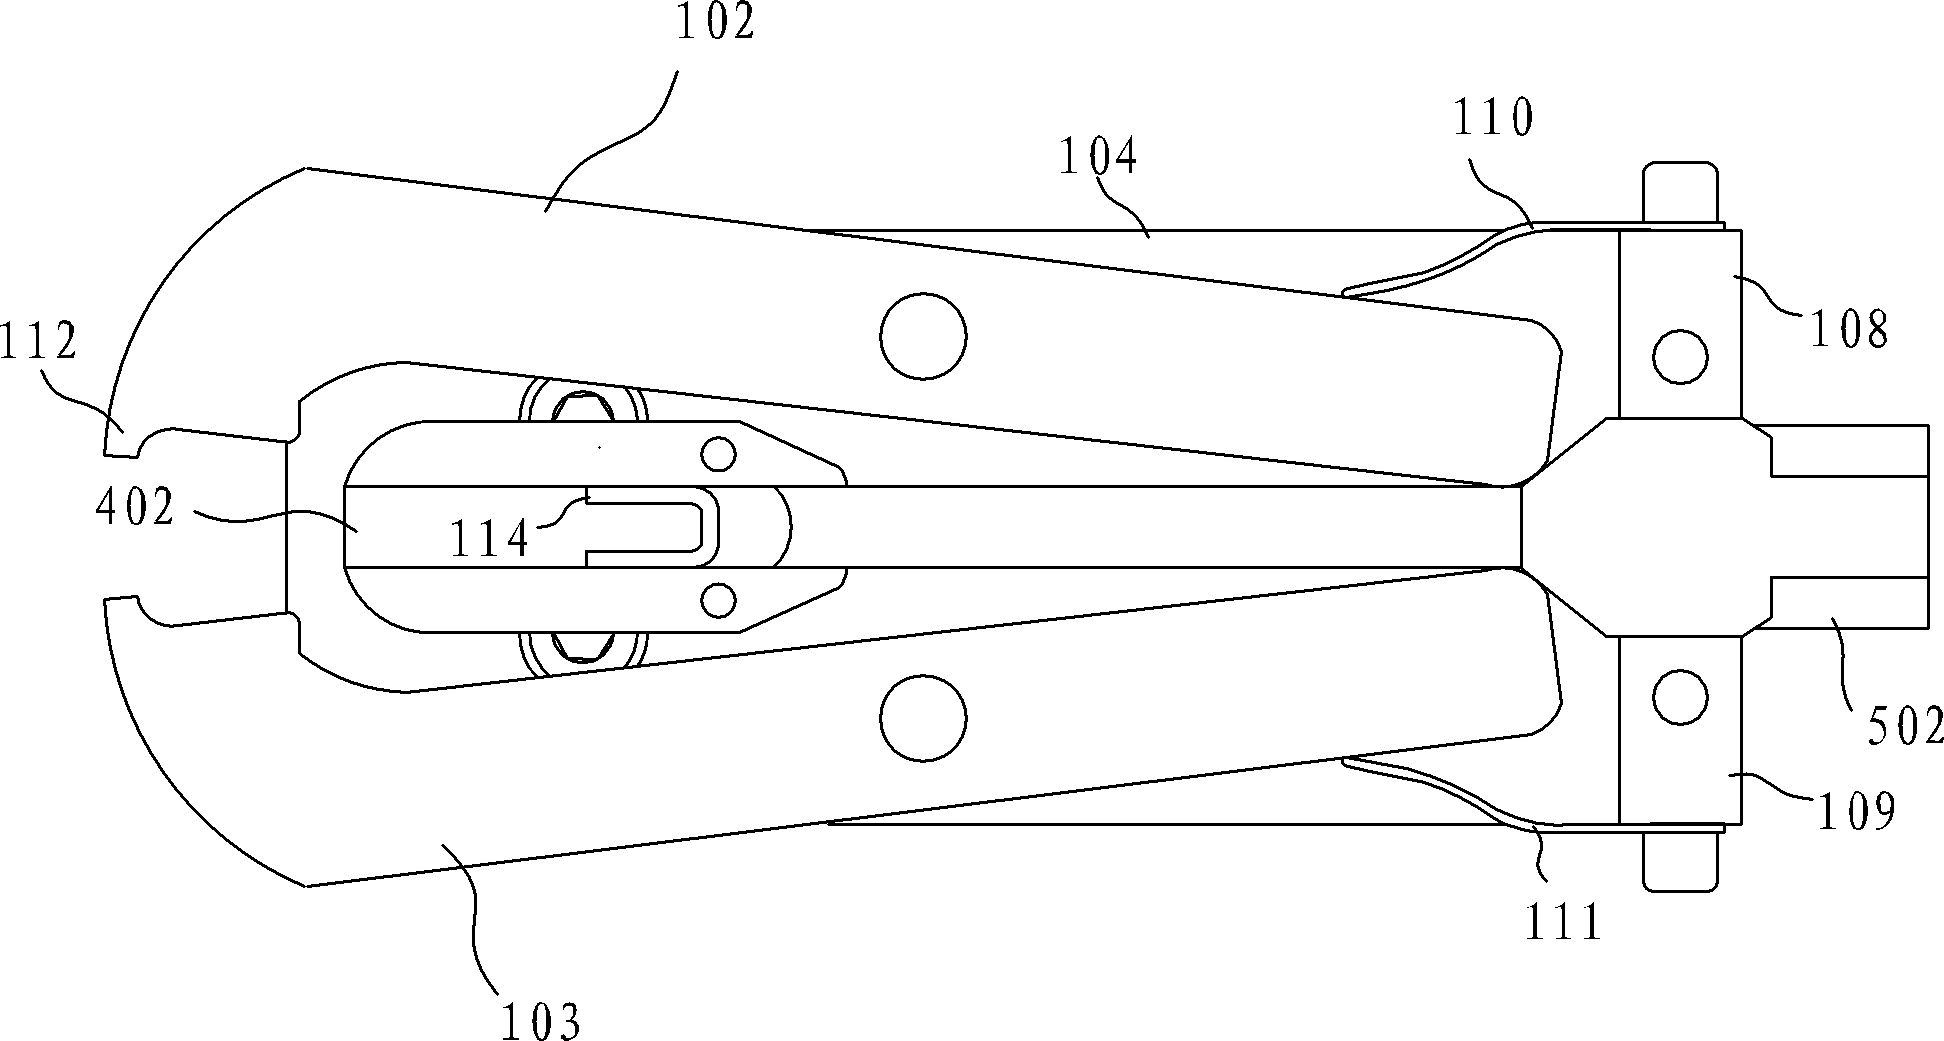 Device for realizing wrapped connection of umbrella ribs and umbrella cloth by using U-shaped nails